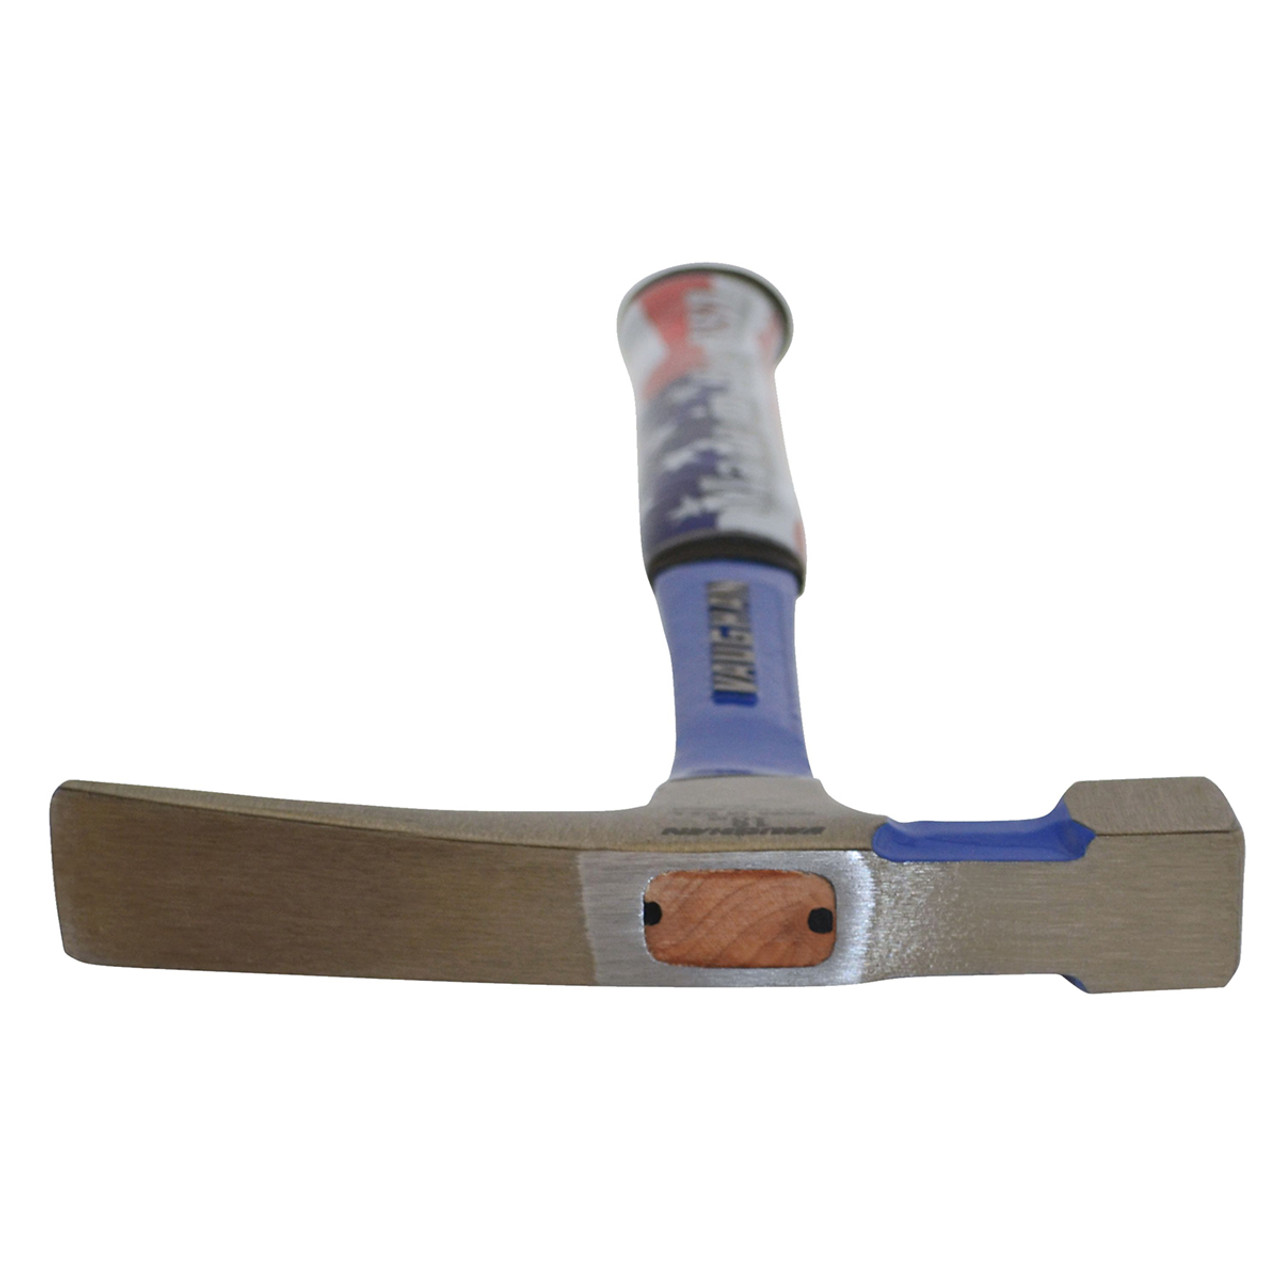 Vaughan 18 oz. Bricklayers hammer, square flat polished face, 11" solid steel handle with rubber grip.